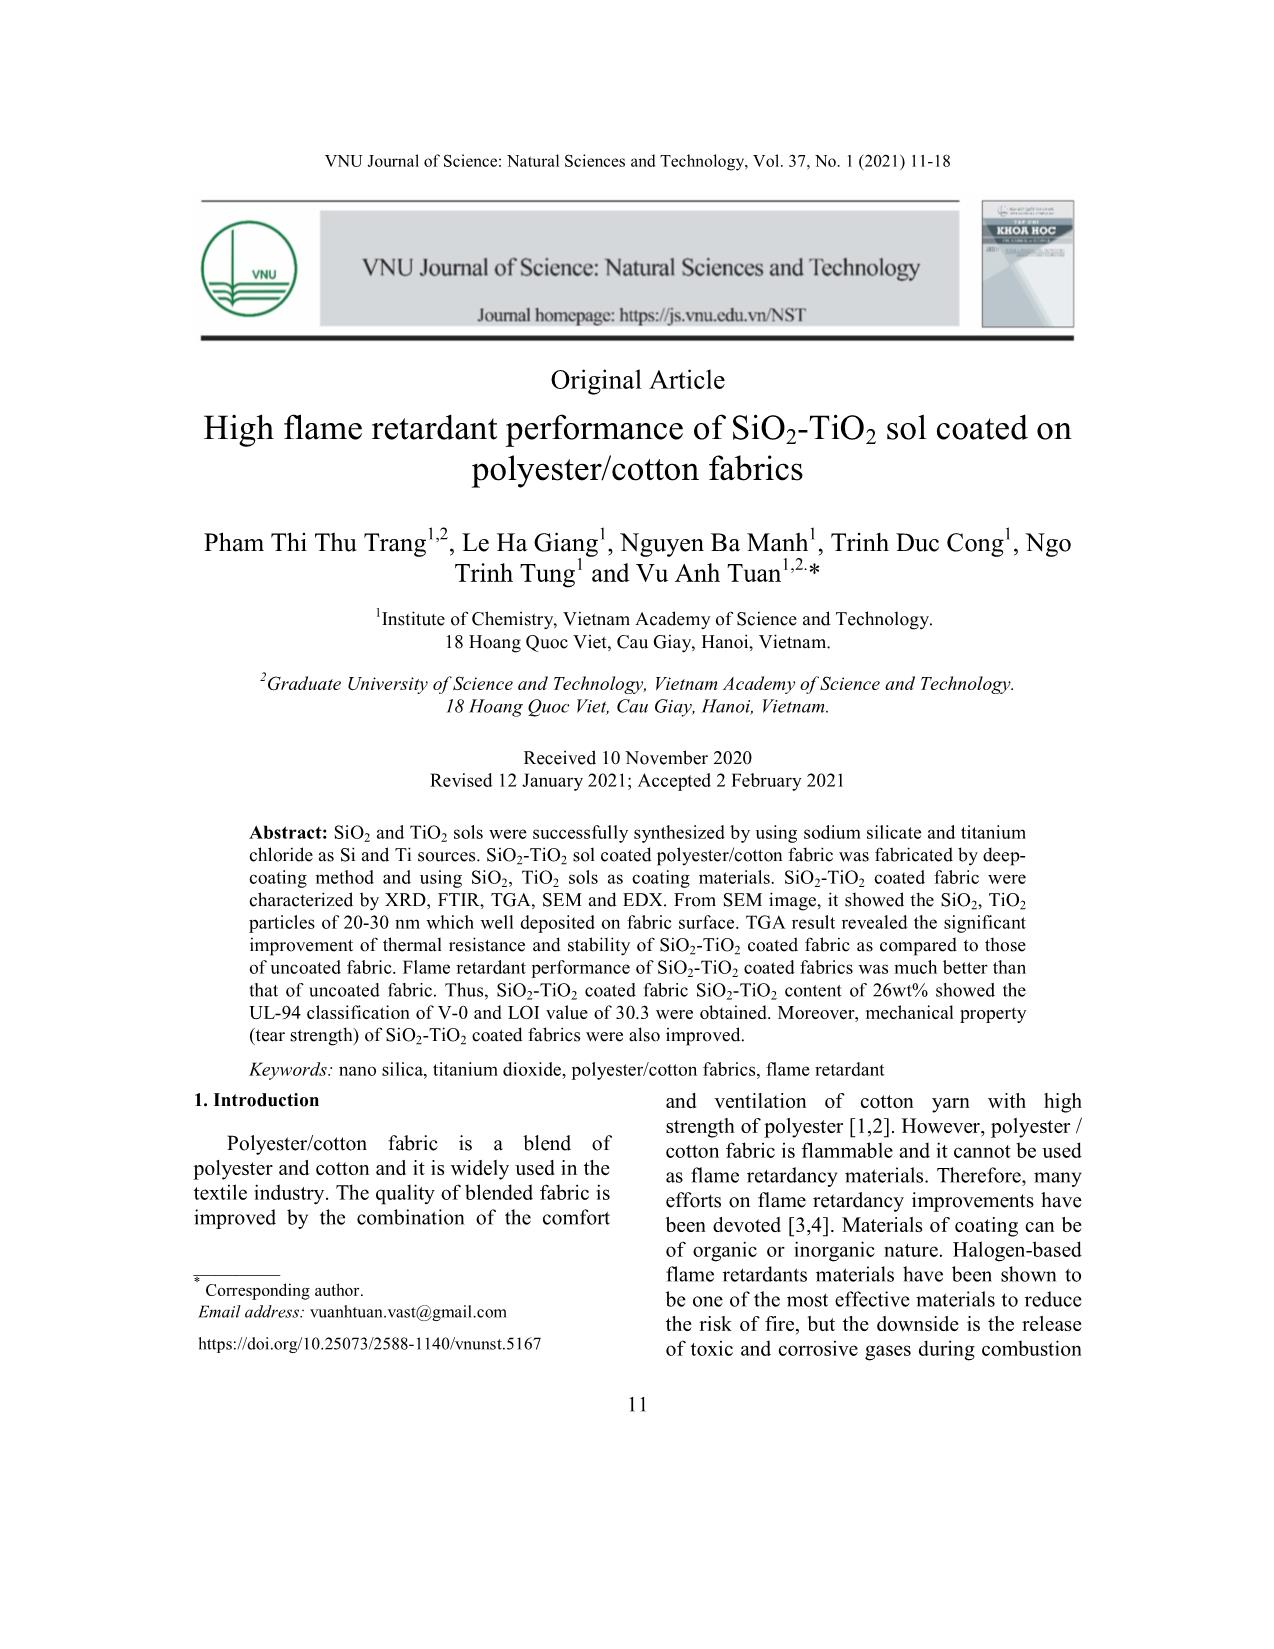 High flame retardant performance of SiO2-TiO2 sol coated on polyester/cotton fabrics trang 1